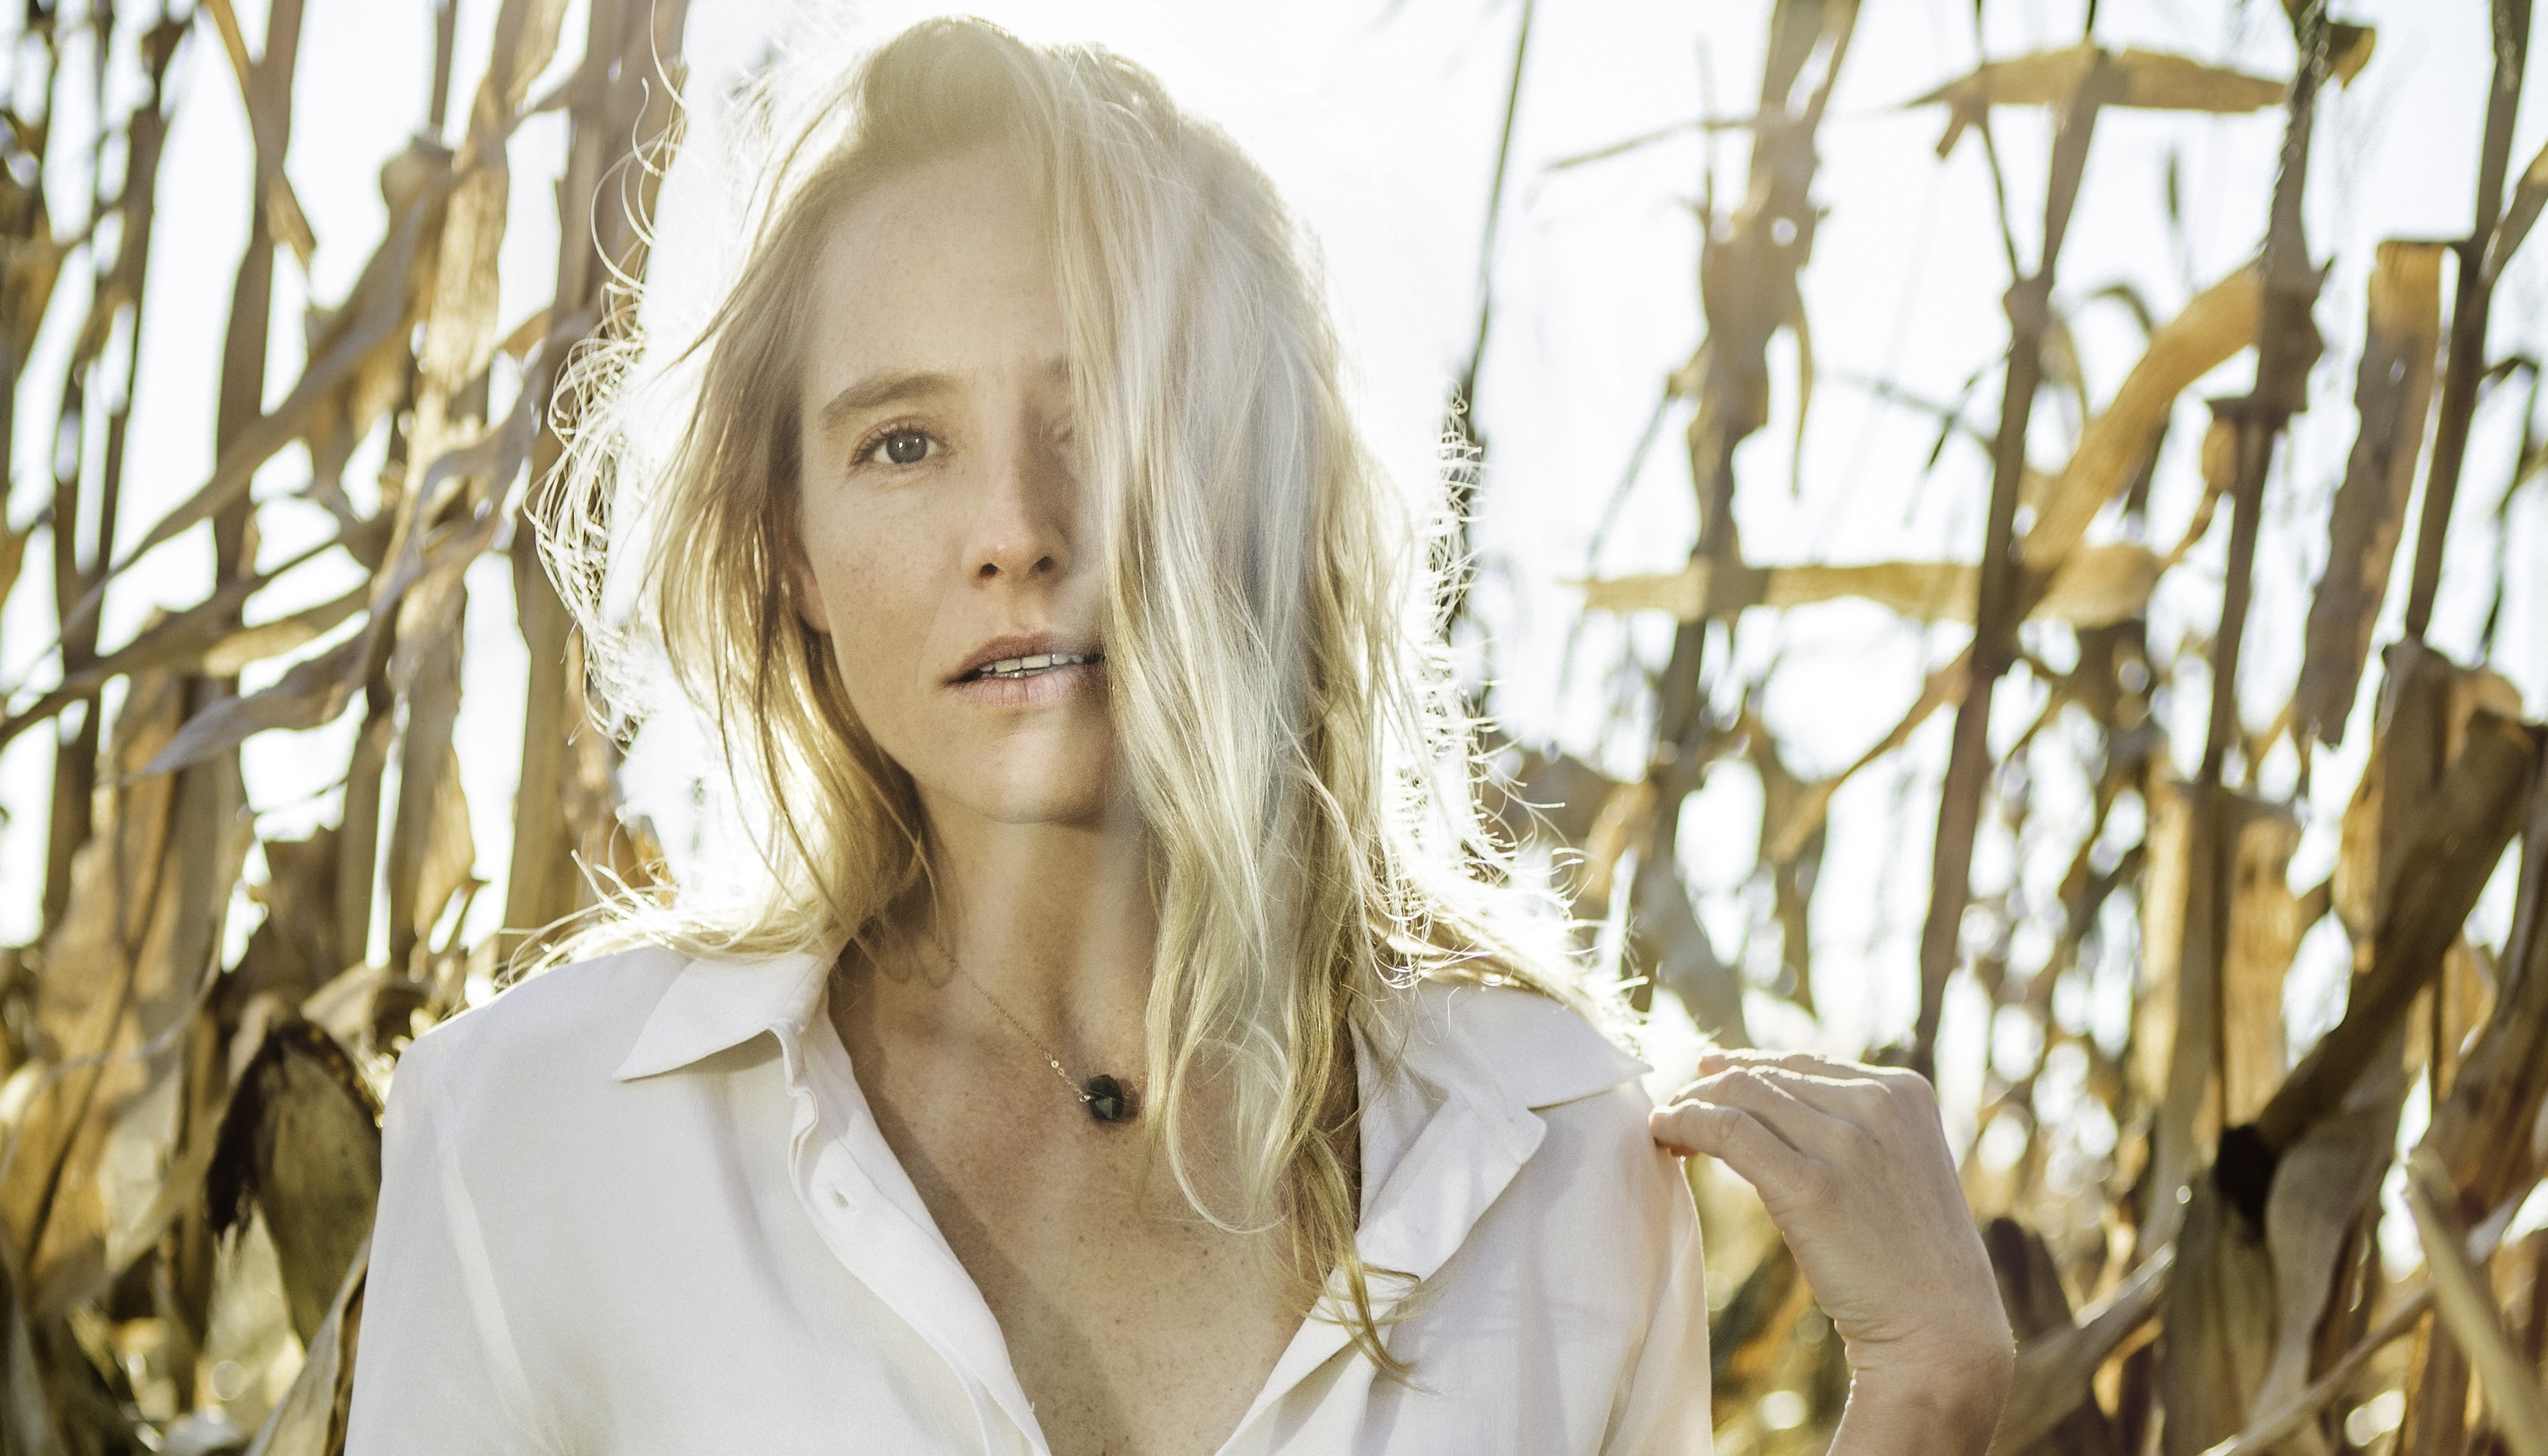 Watch Lissie’s Spacey New Video For “Best Days”